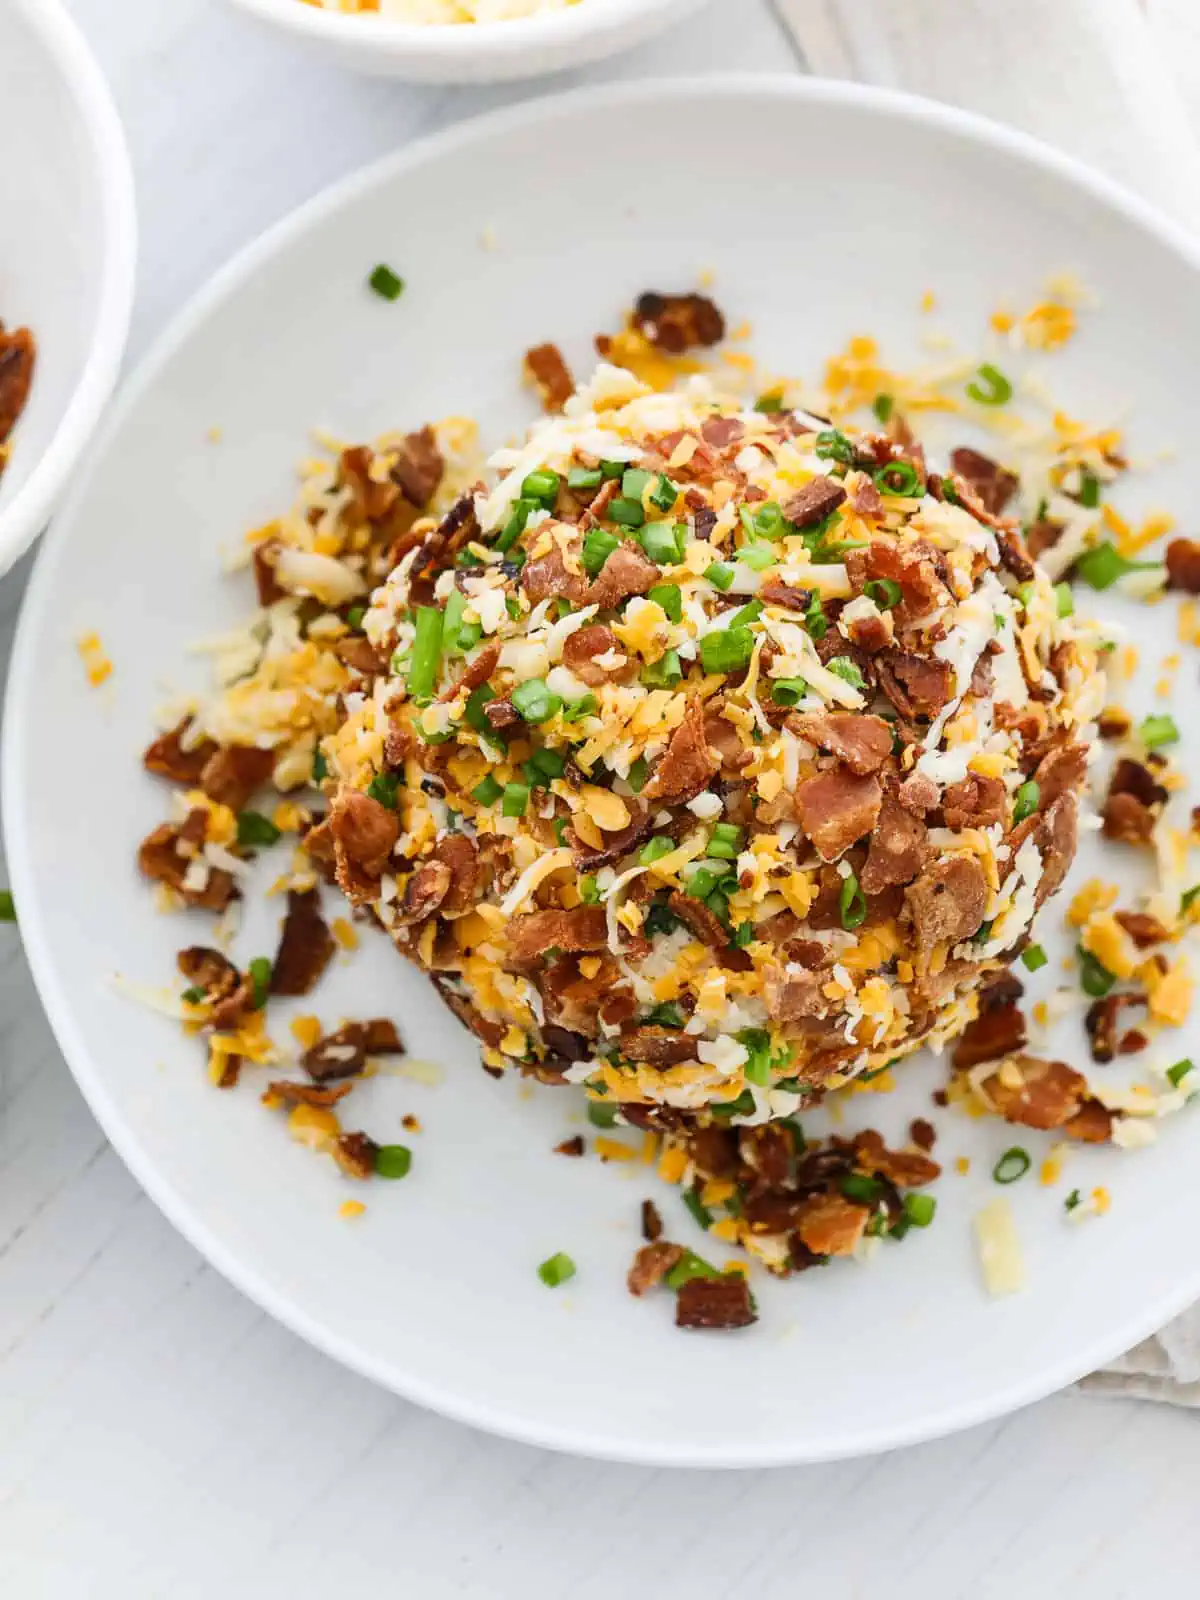 A bacon cheese ball coated on a plate with crumbled bacon, grated cheese, and green onions.